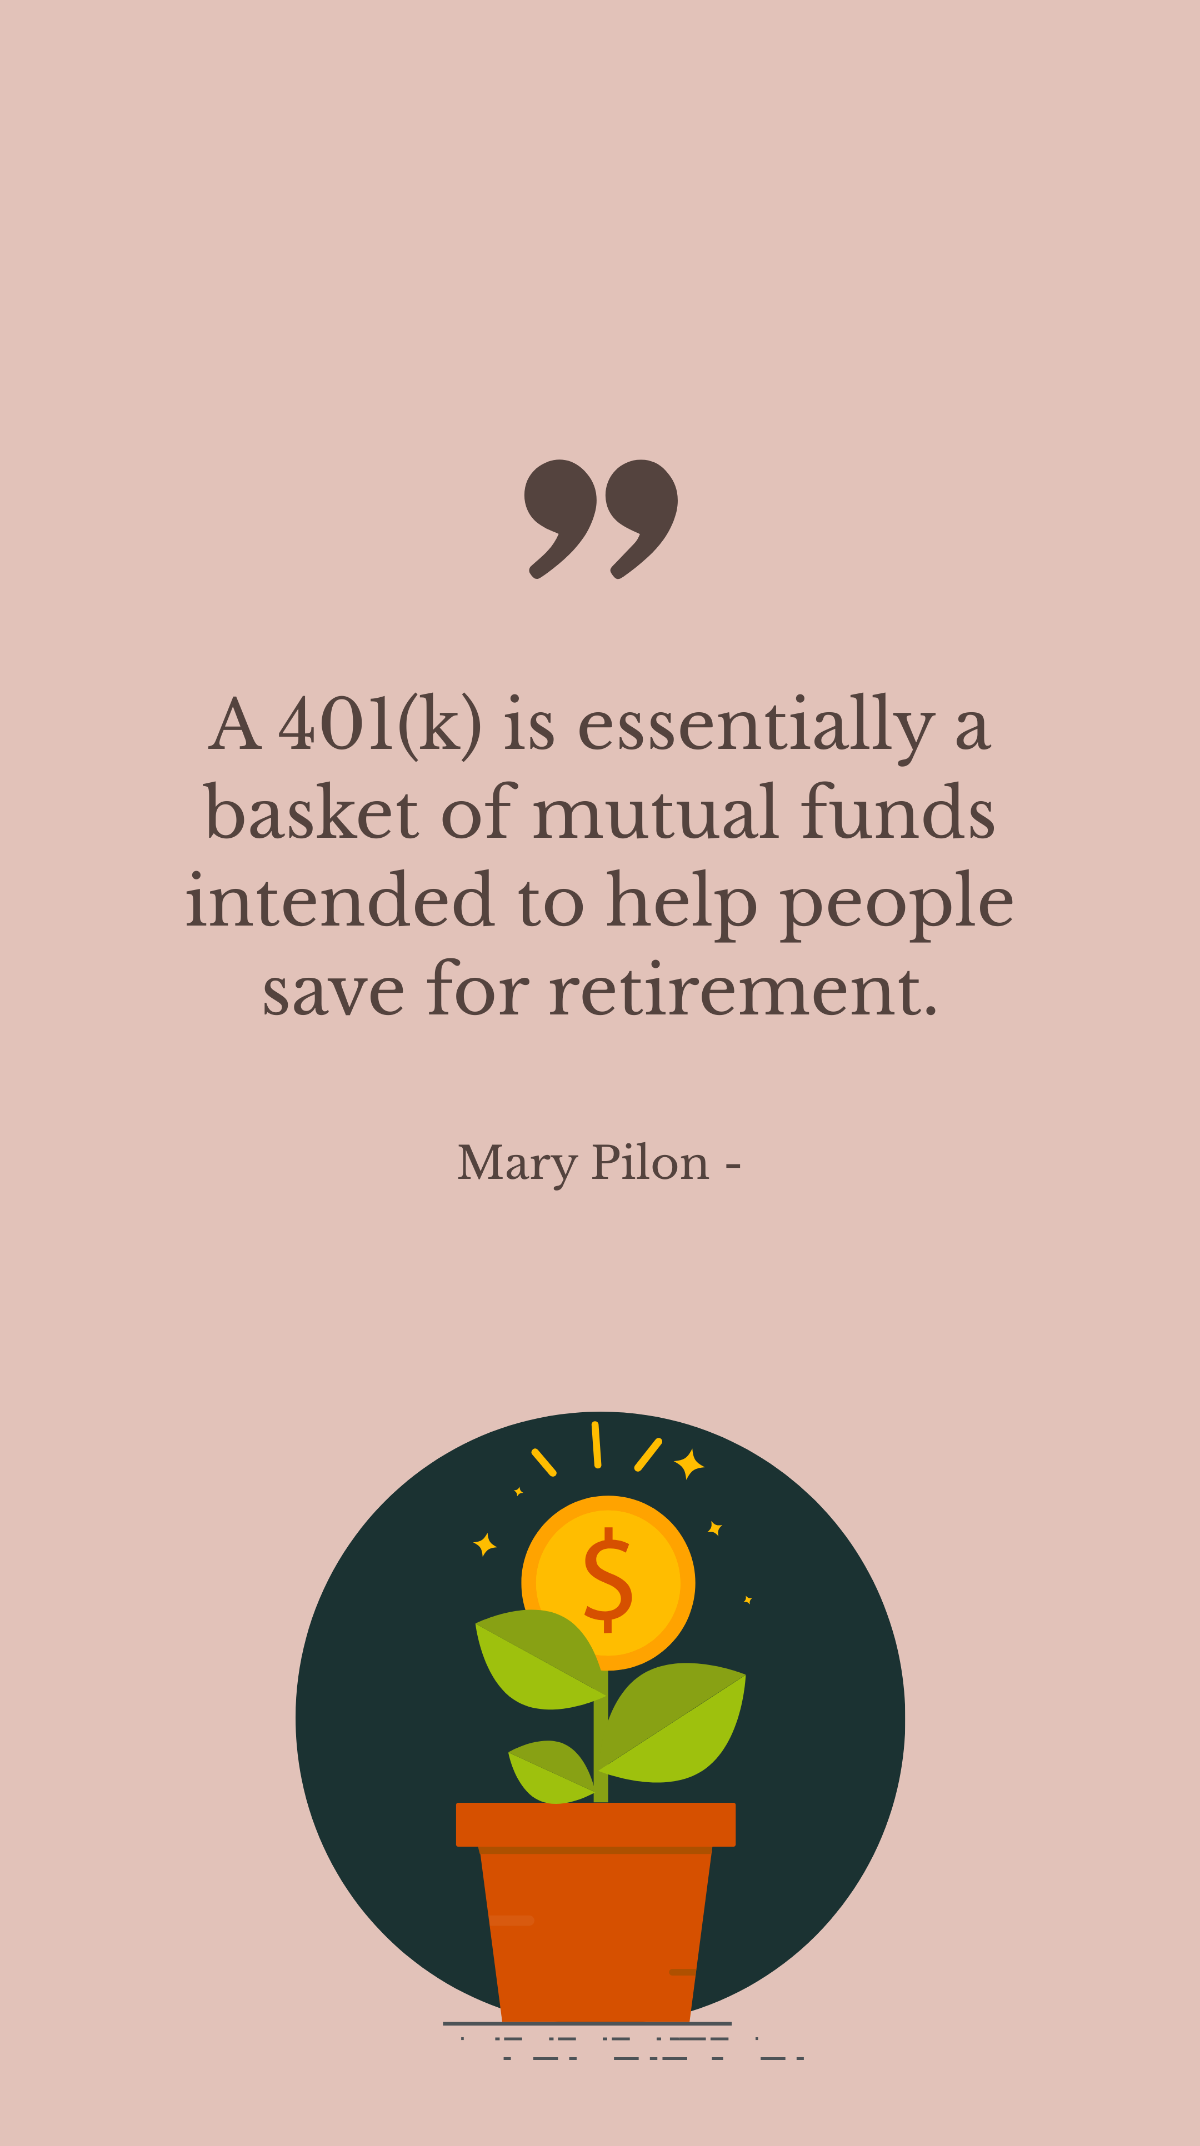 Mary Pilon - A 401(k) is essentially a basket of mutual funds intended to help people save for retirement. Template